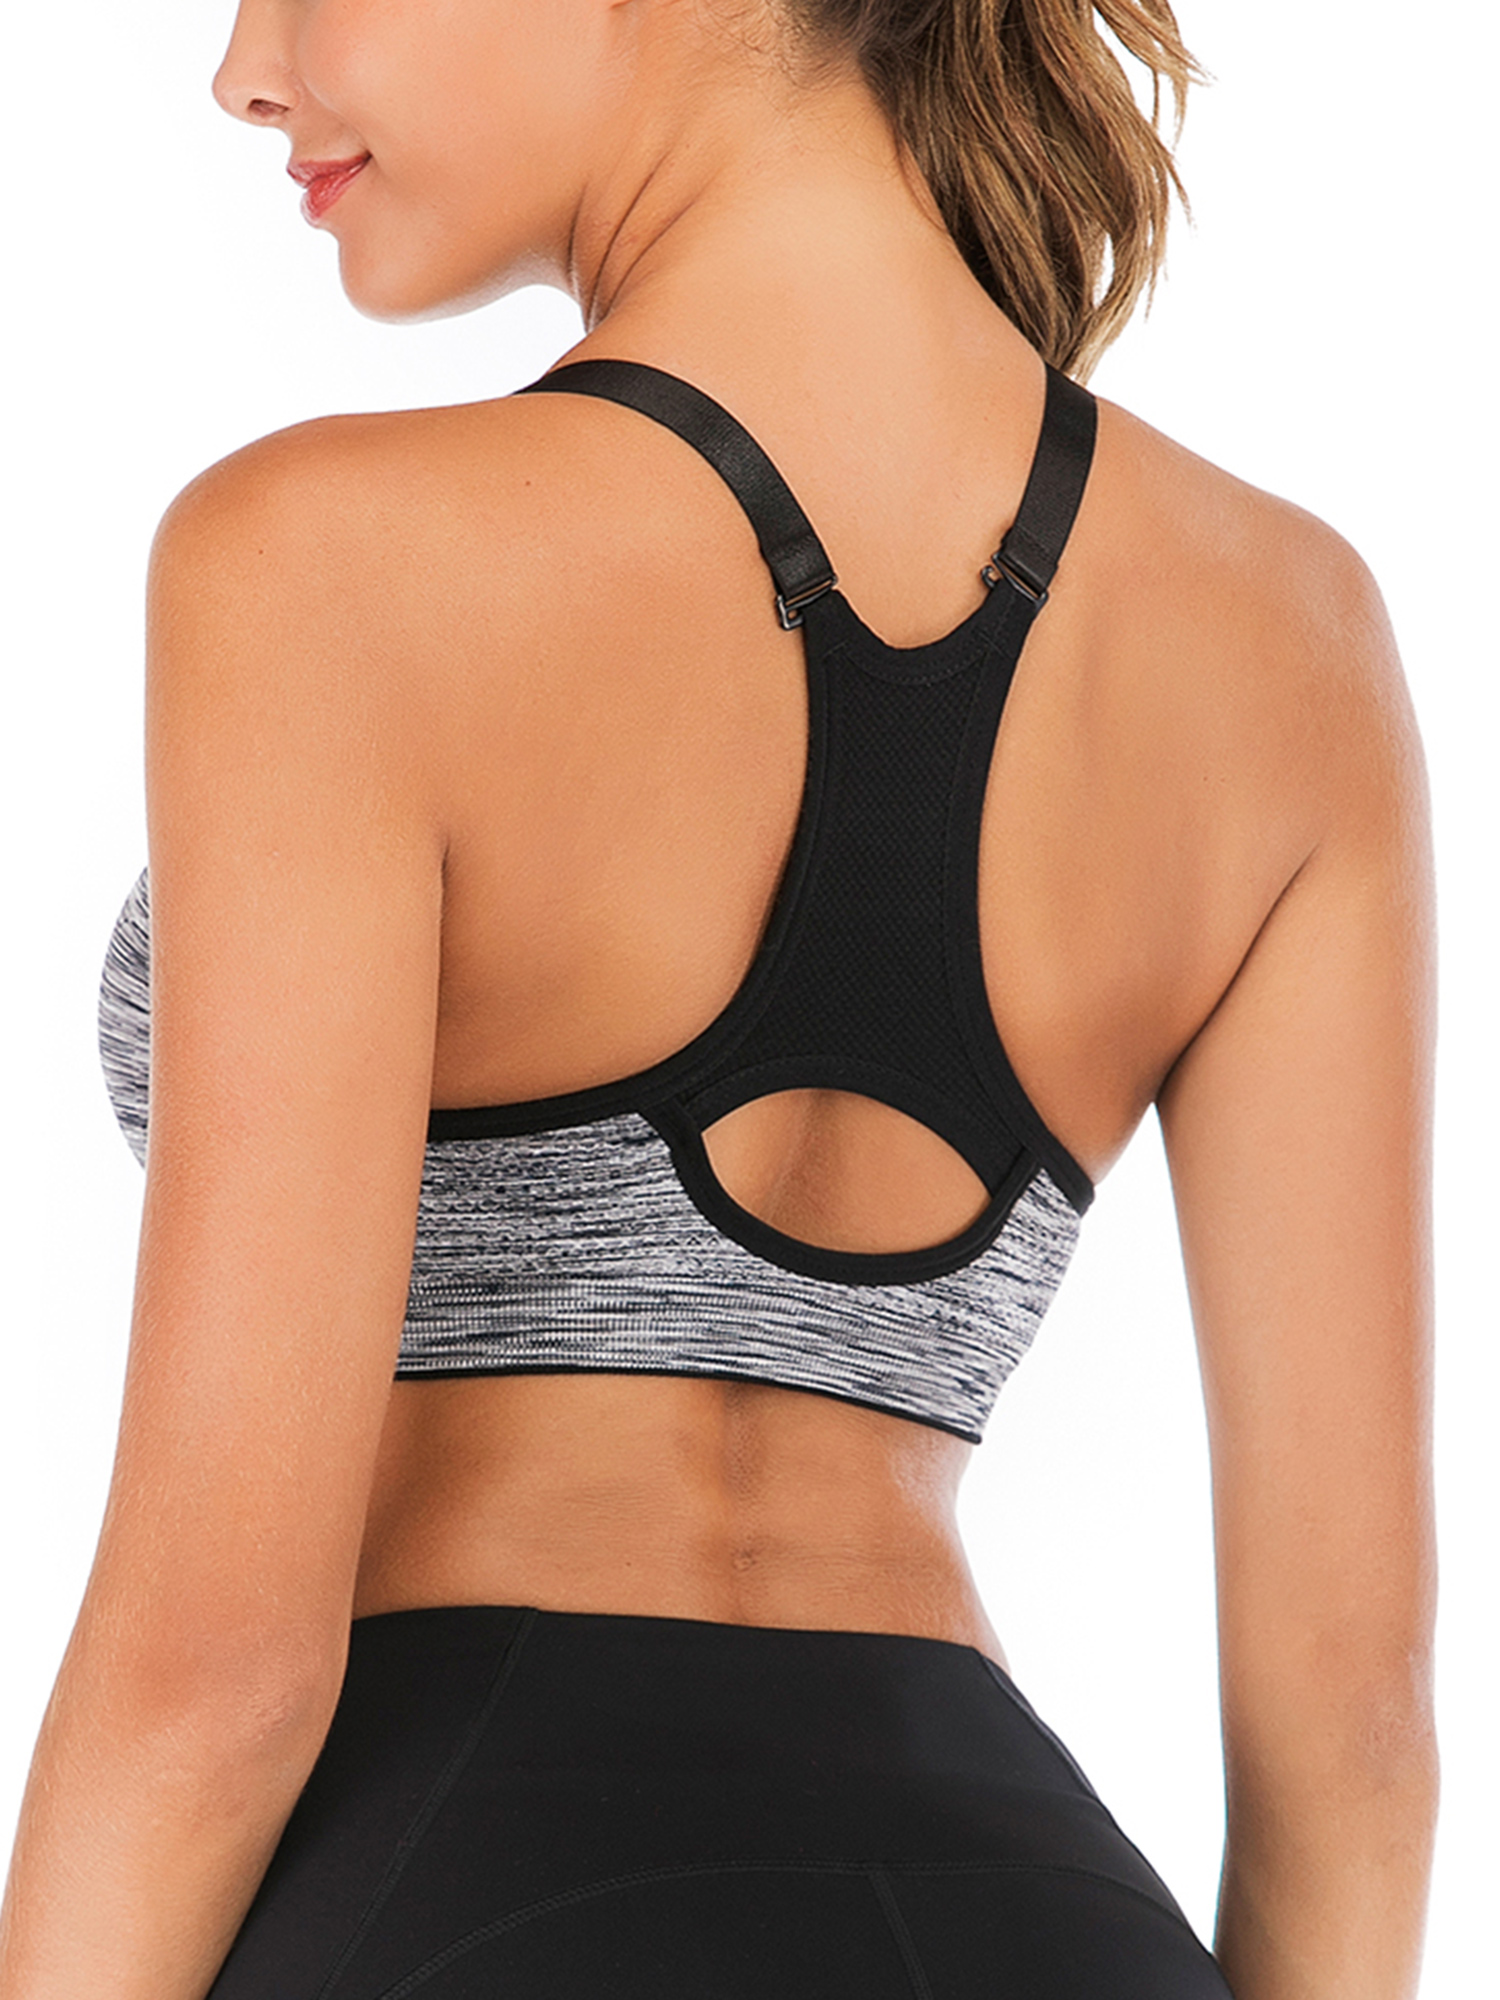 Women's Seamless Wirefree Racerback Adjustable Straps Yoga Sports Bra Top Lingerie - image 5 of 7